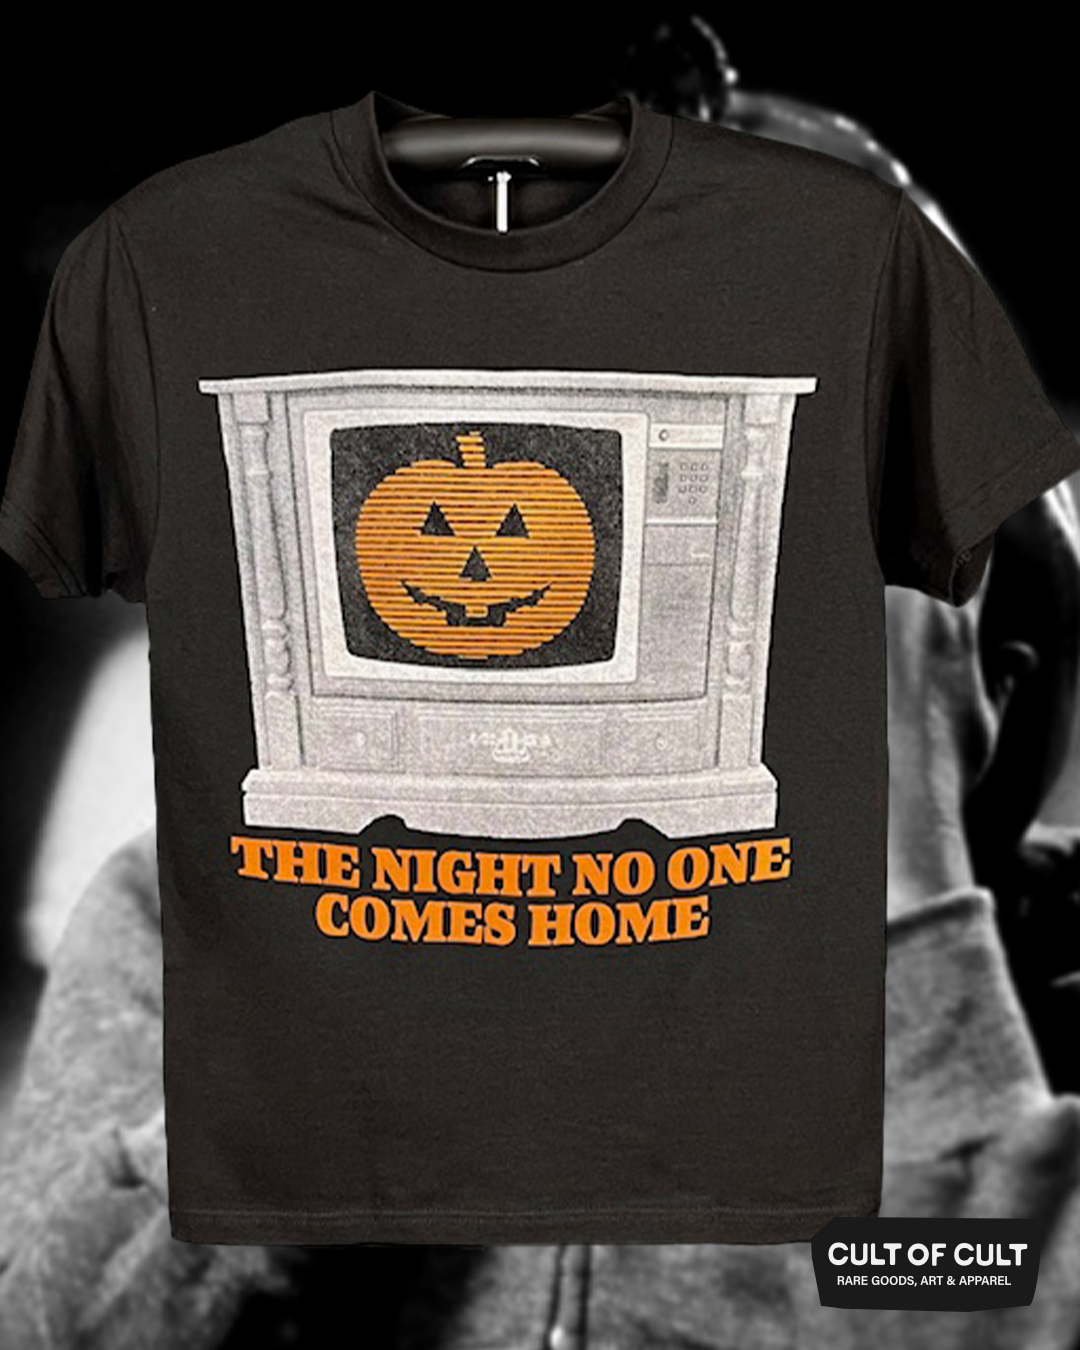 Halloween 3 Season of the Witch 1982 T-Shirt